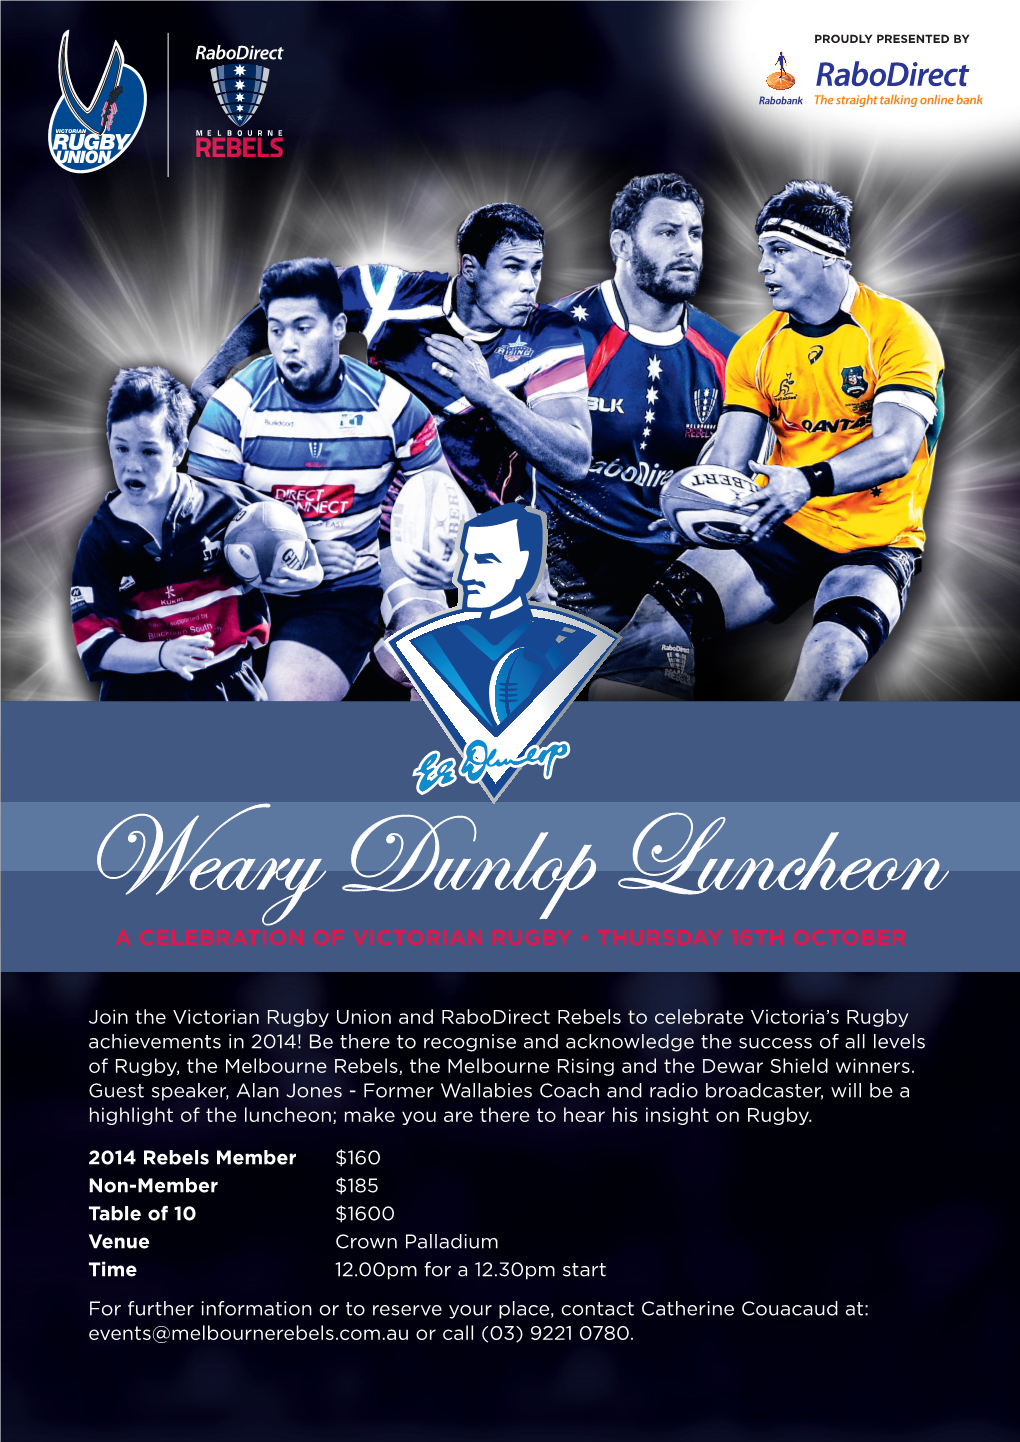 Weary Dunlop Luncheon a CELEBRATION of VICTORIAN RUGBY • THURSDAY 16TH OCTOBER